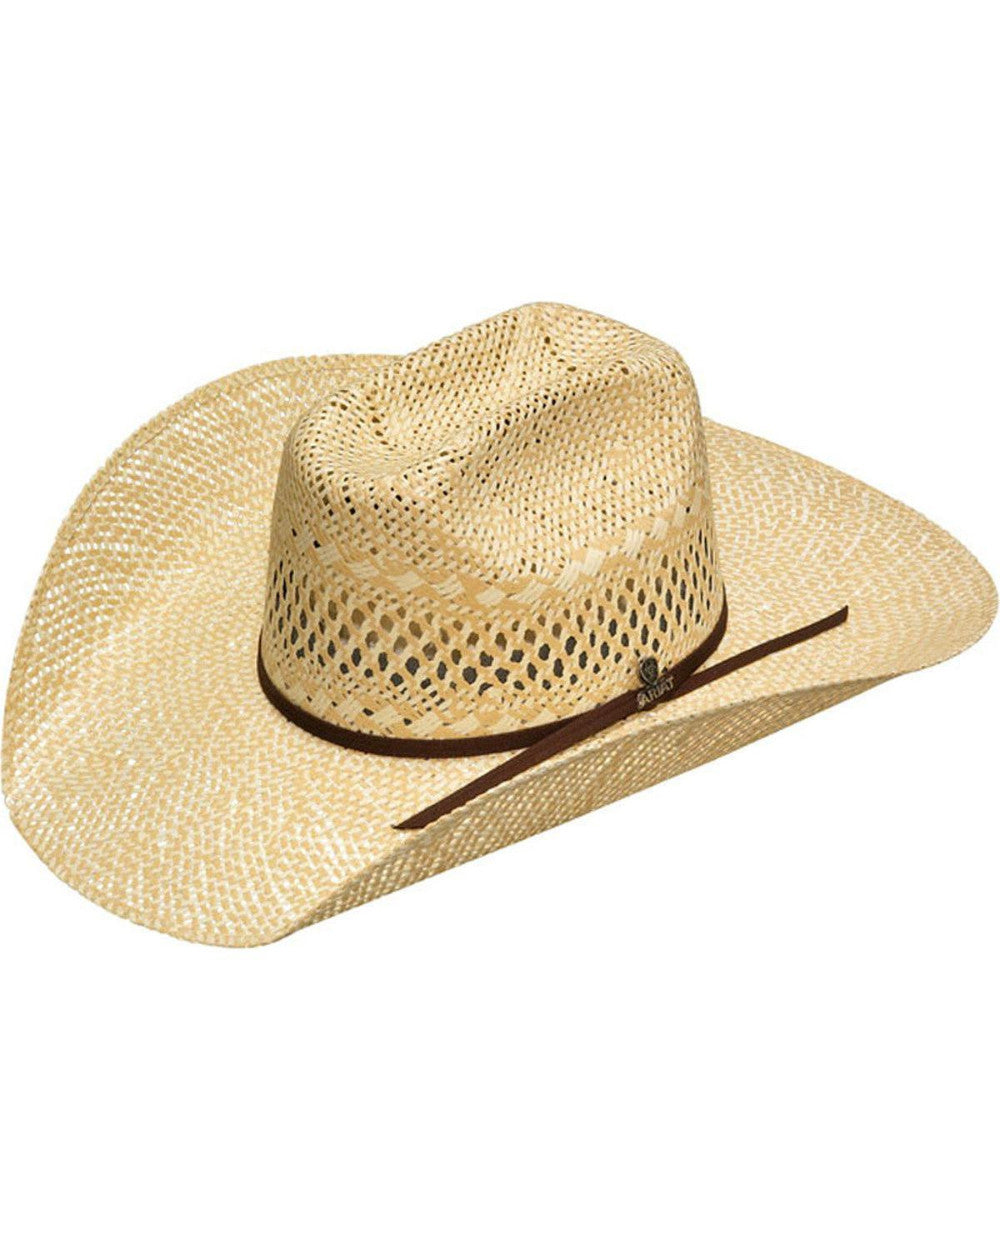 Ariat Twisted Weave Cowboy Hat A73150